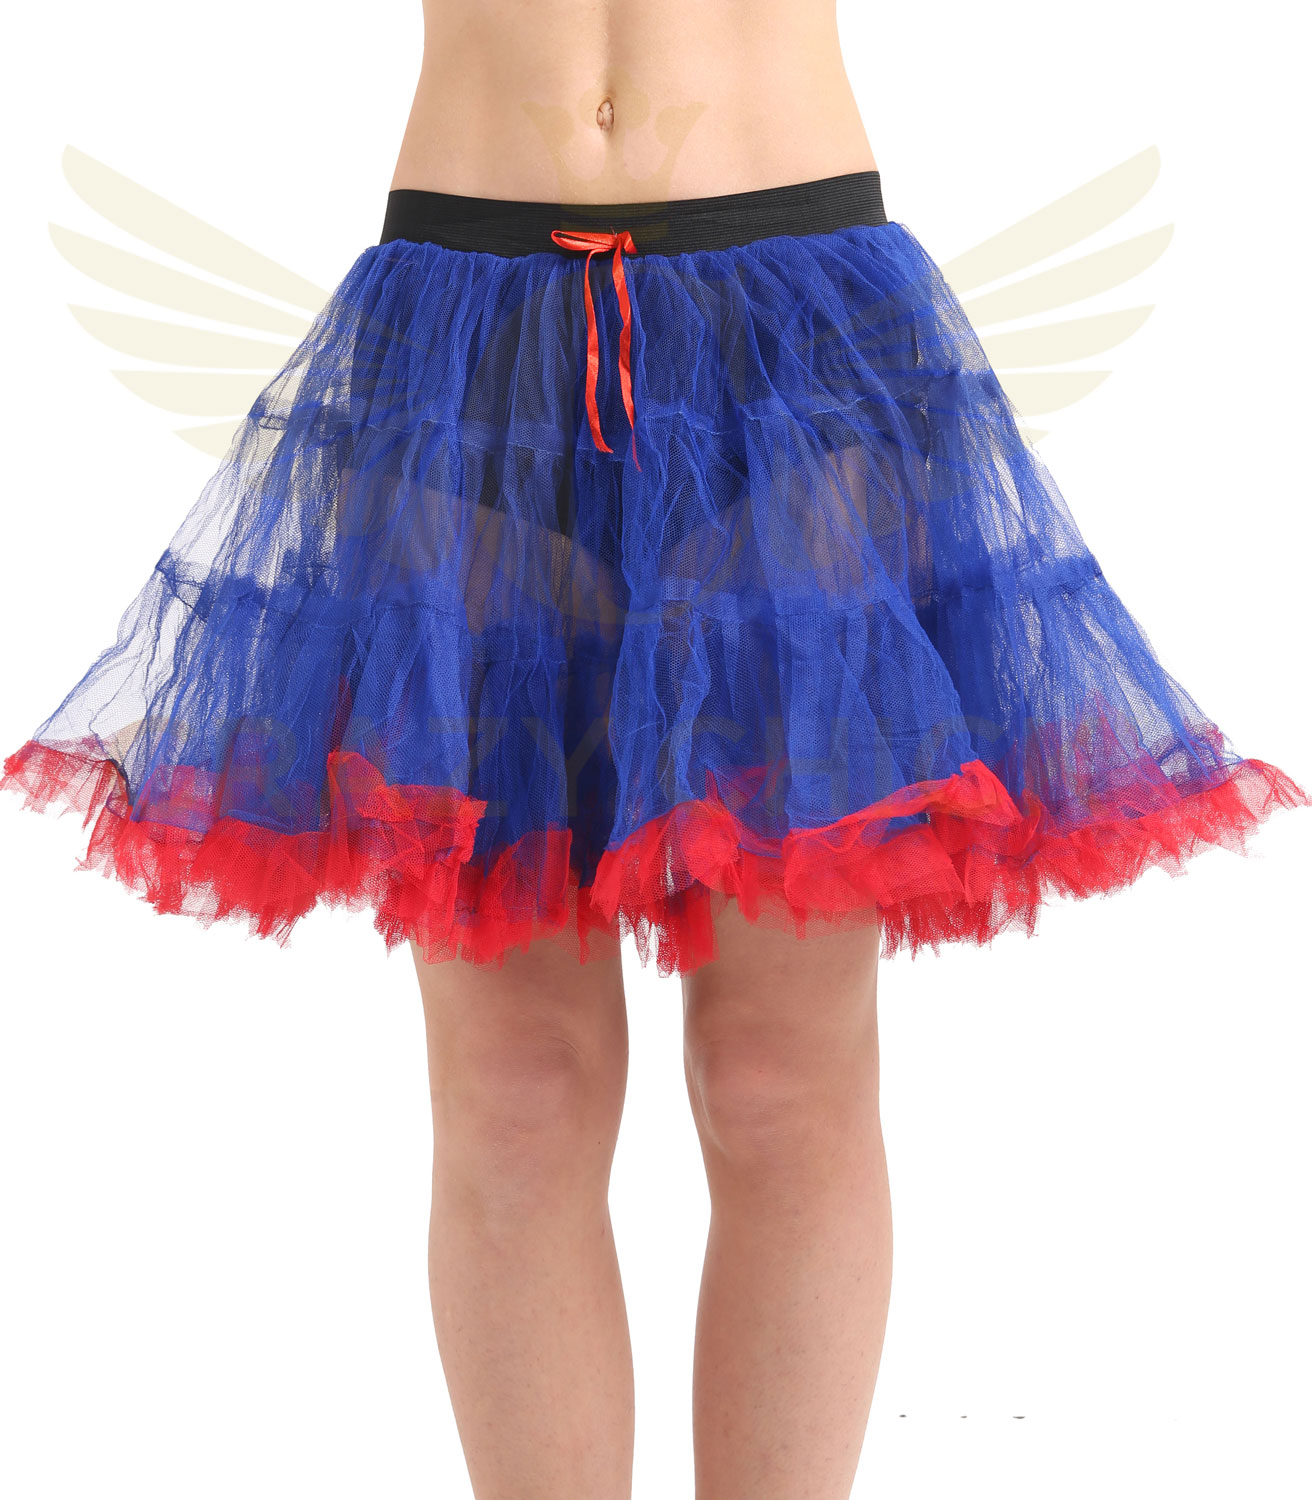 Crazy Chick Adult 2 Layer Dance Ruffle Edged Tutu Skirt Blue and Red Ruffle